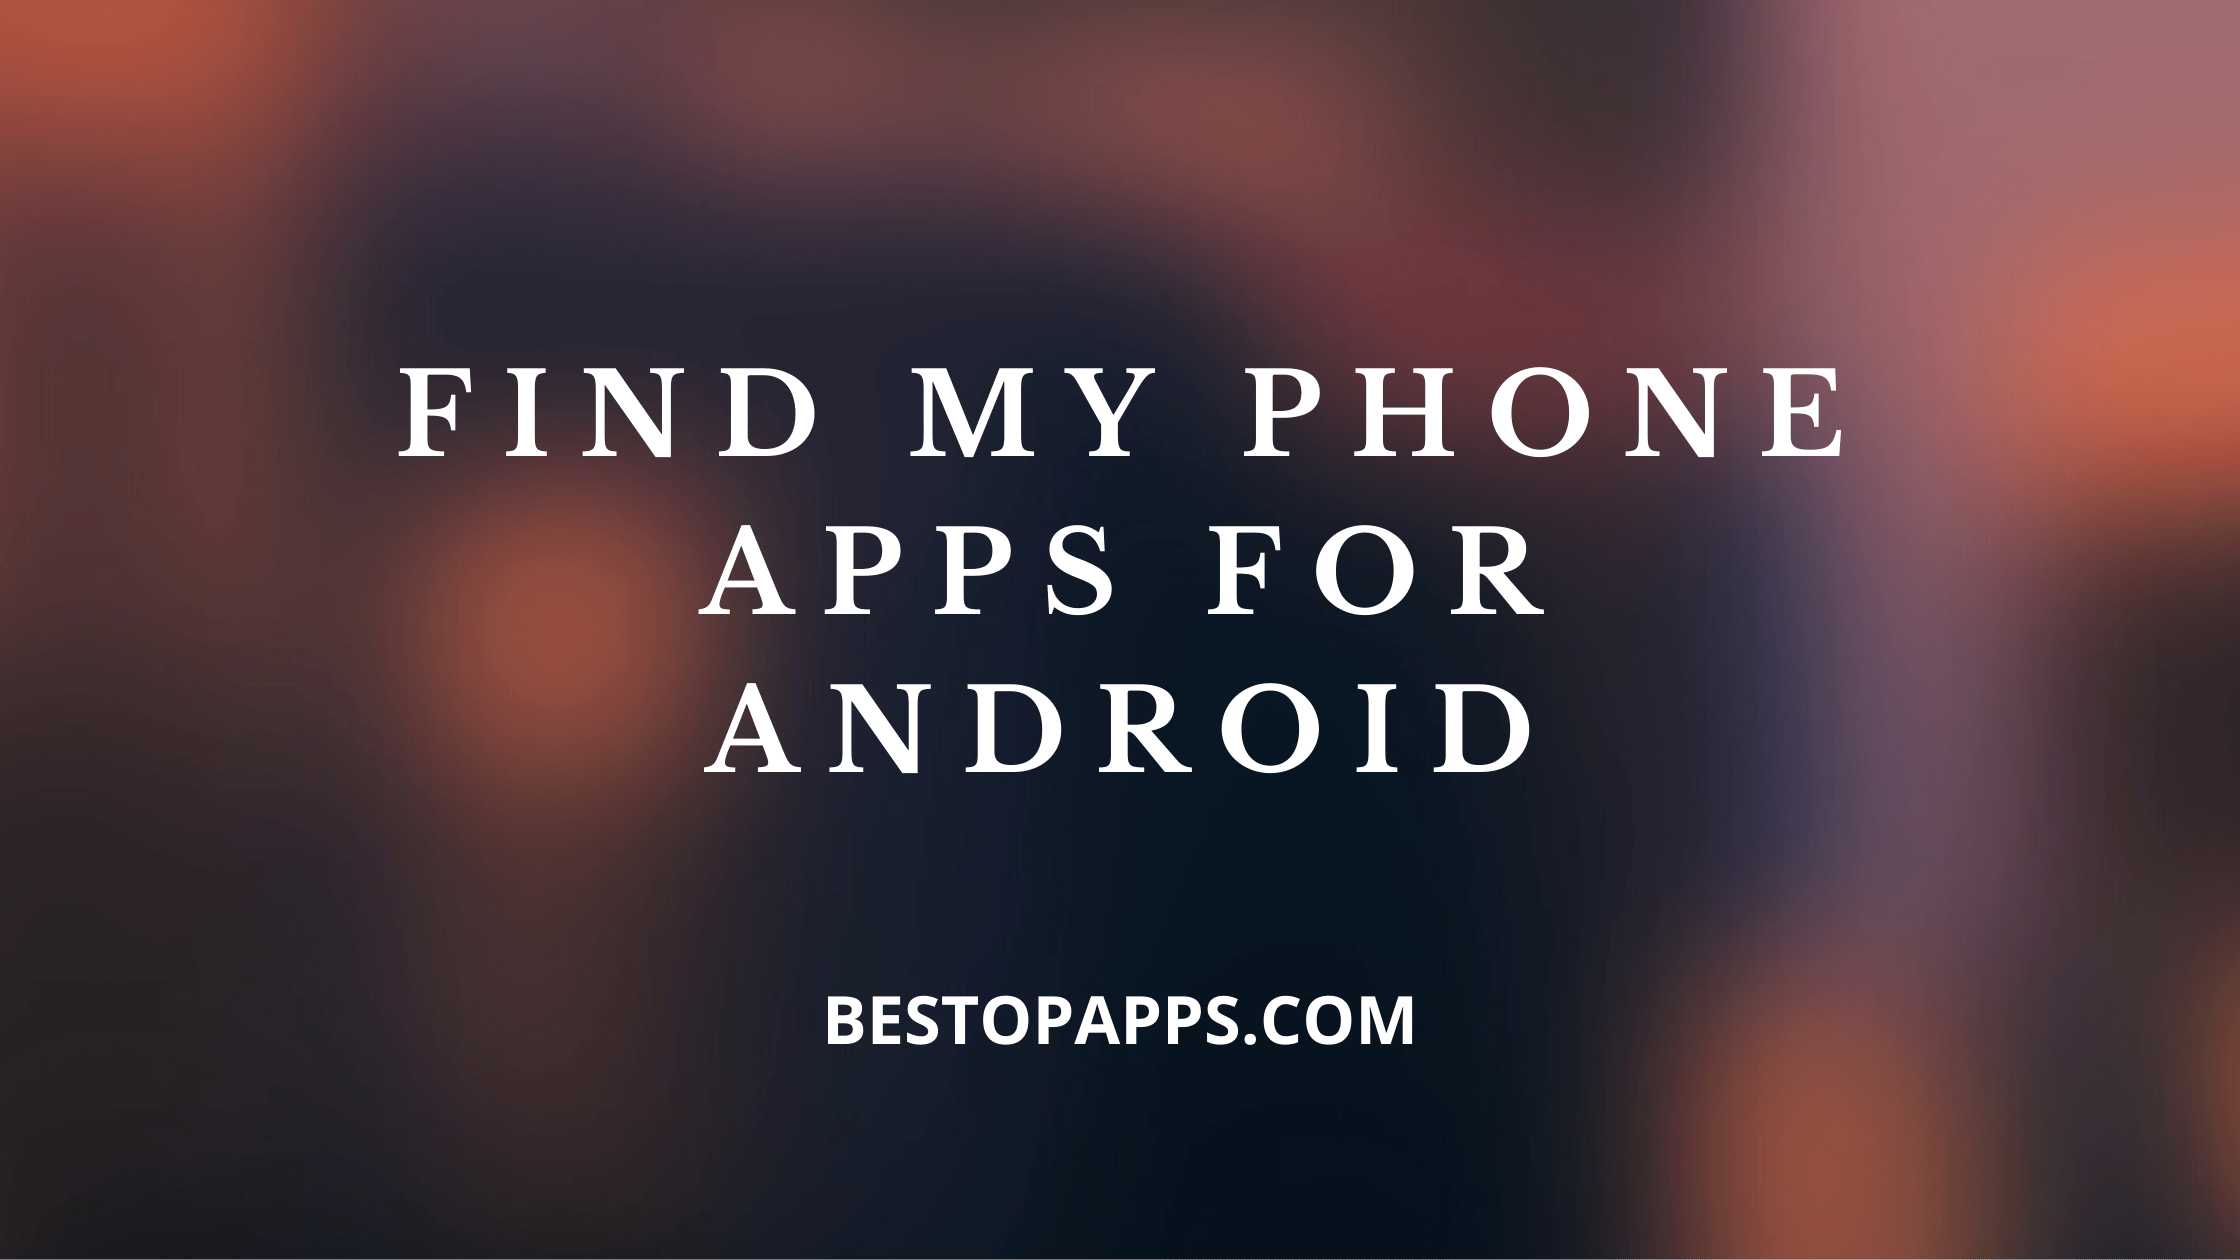 FIND MY PHONE APPS FOR ANDROID